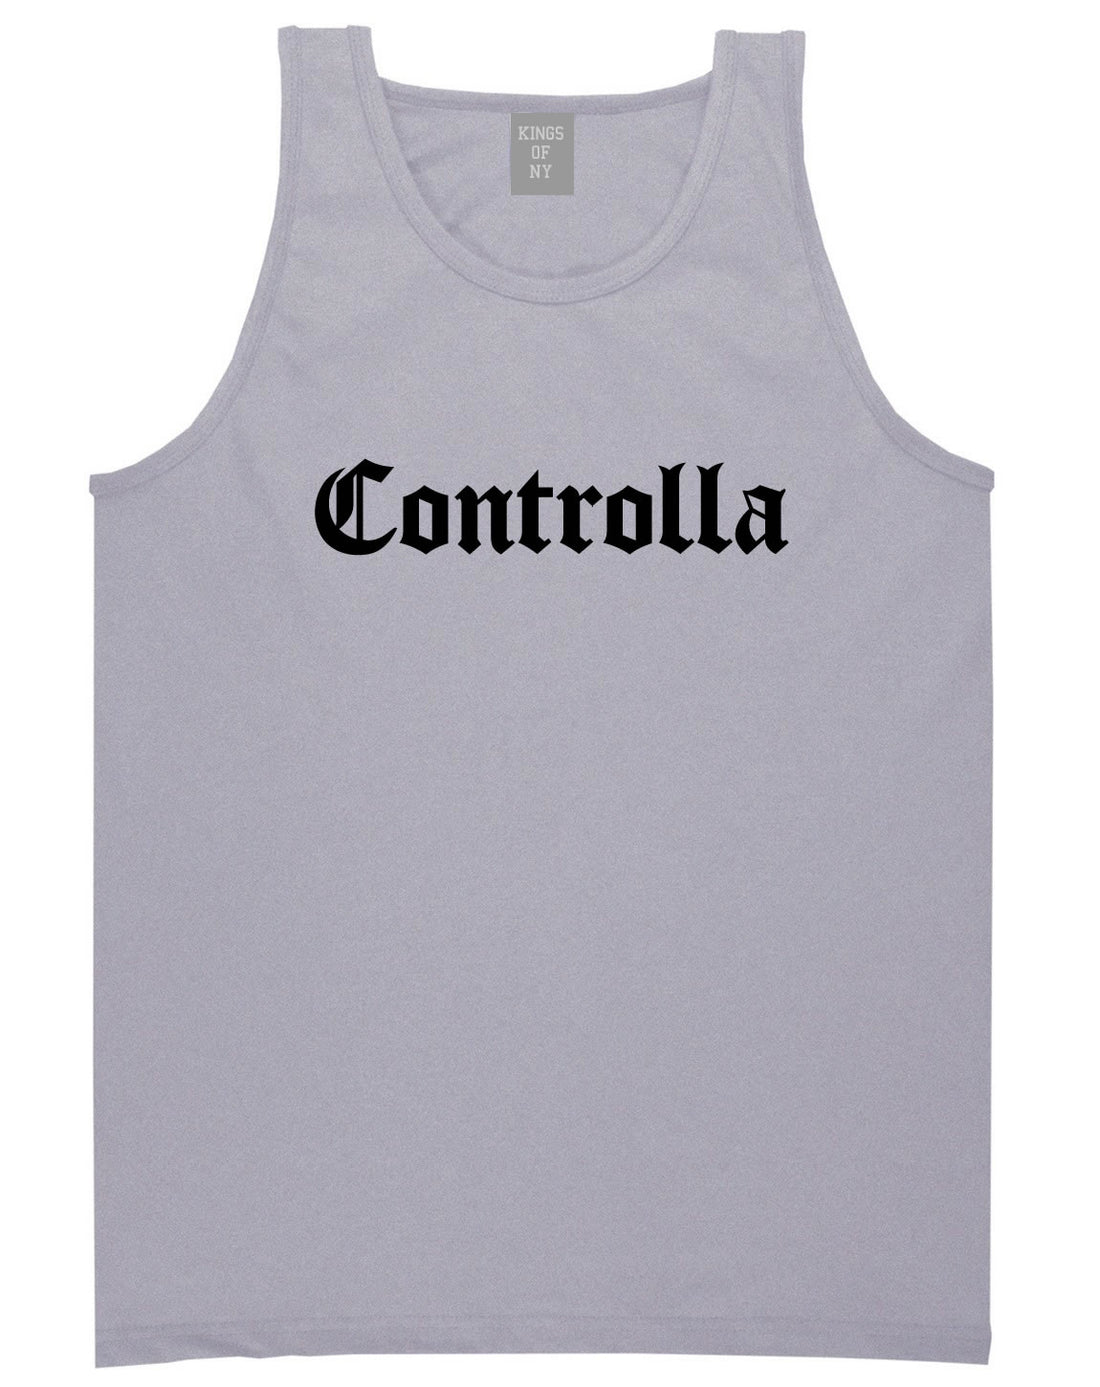 Controlla Tank Top By Kings Of NY